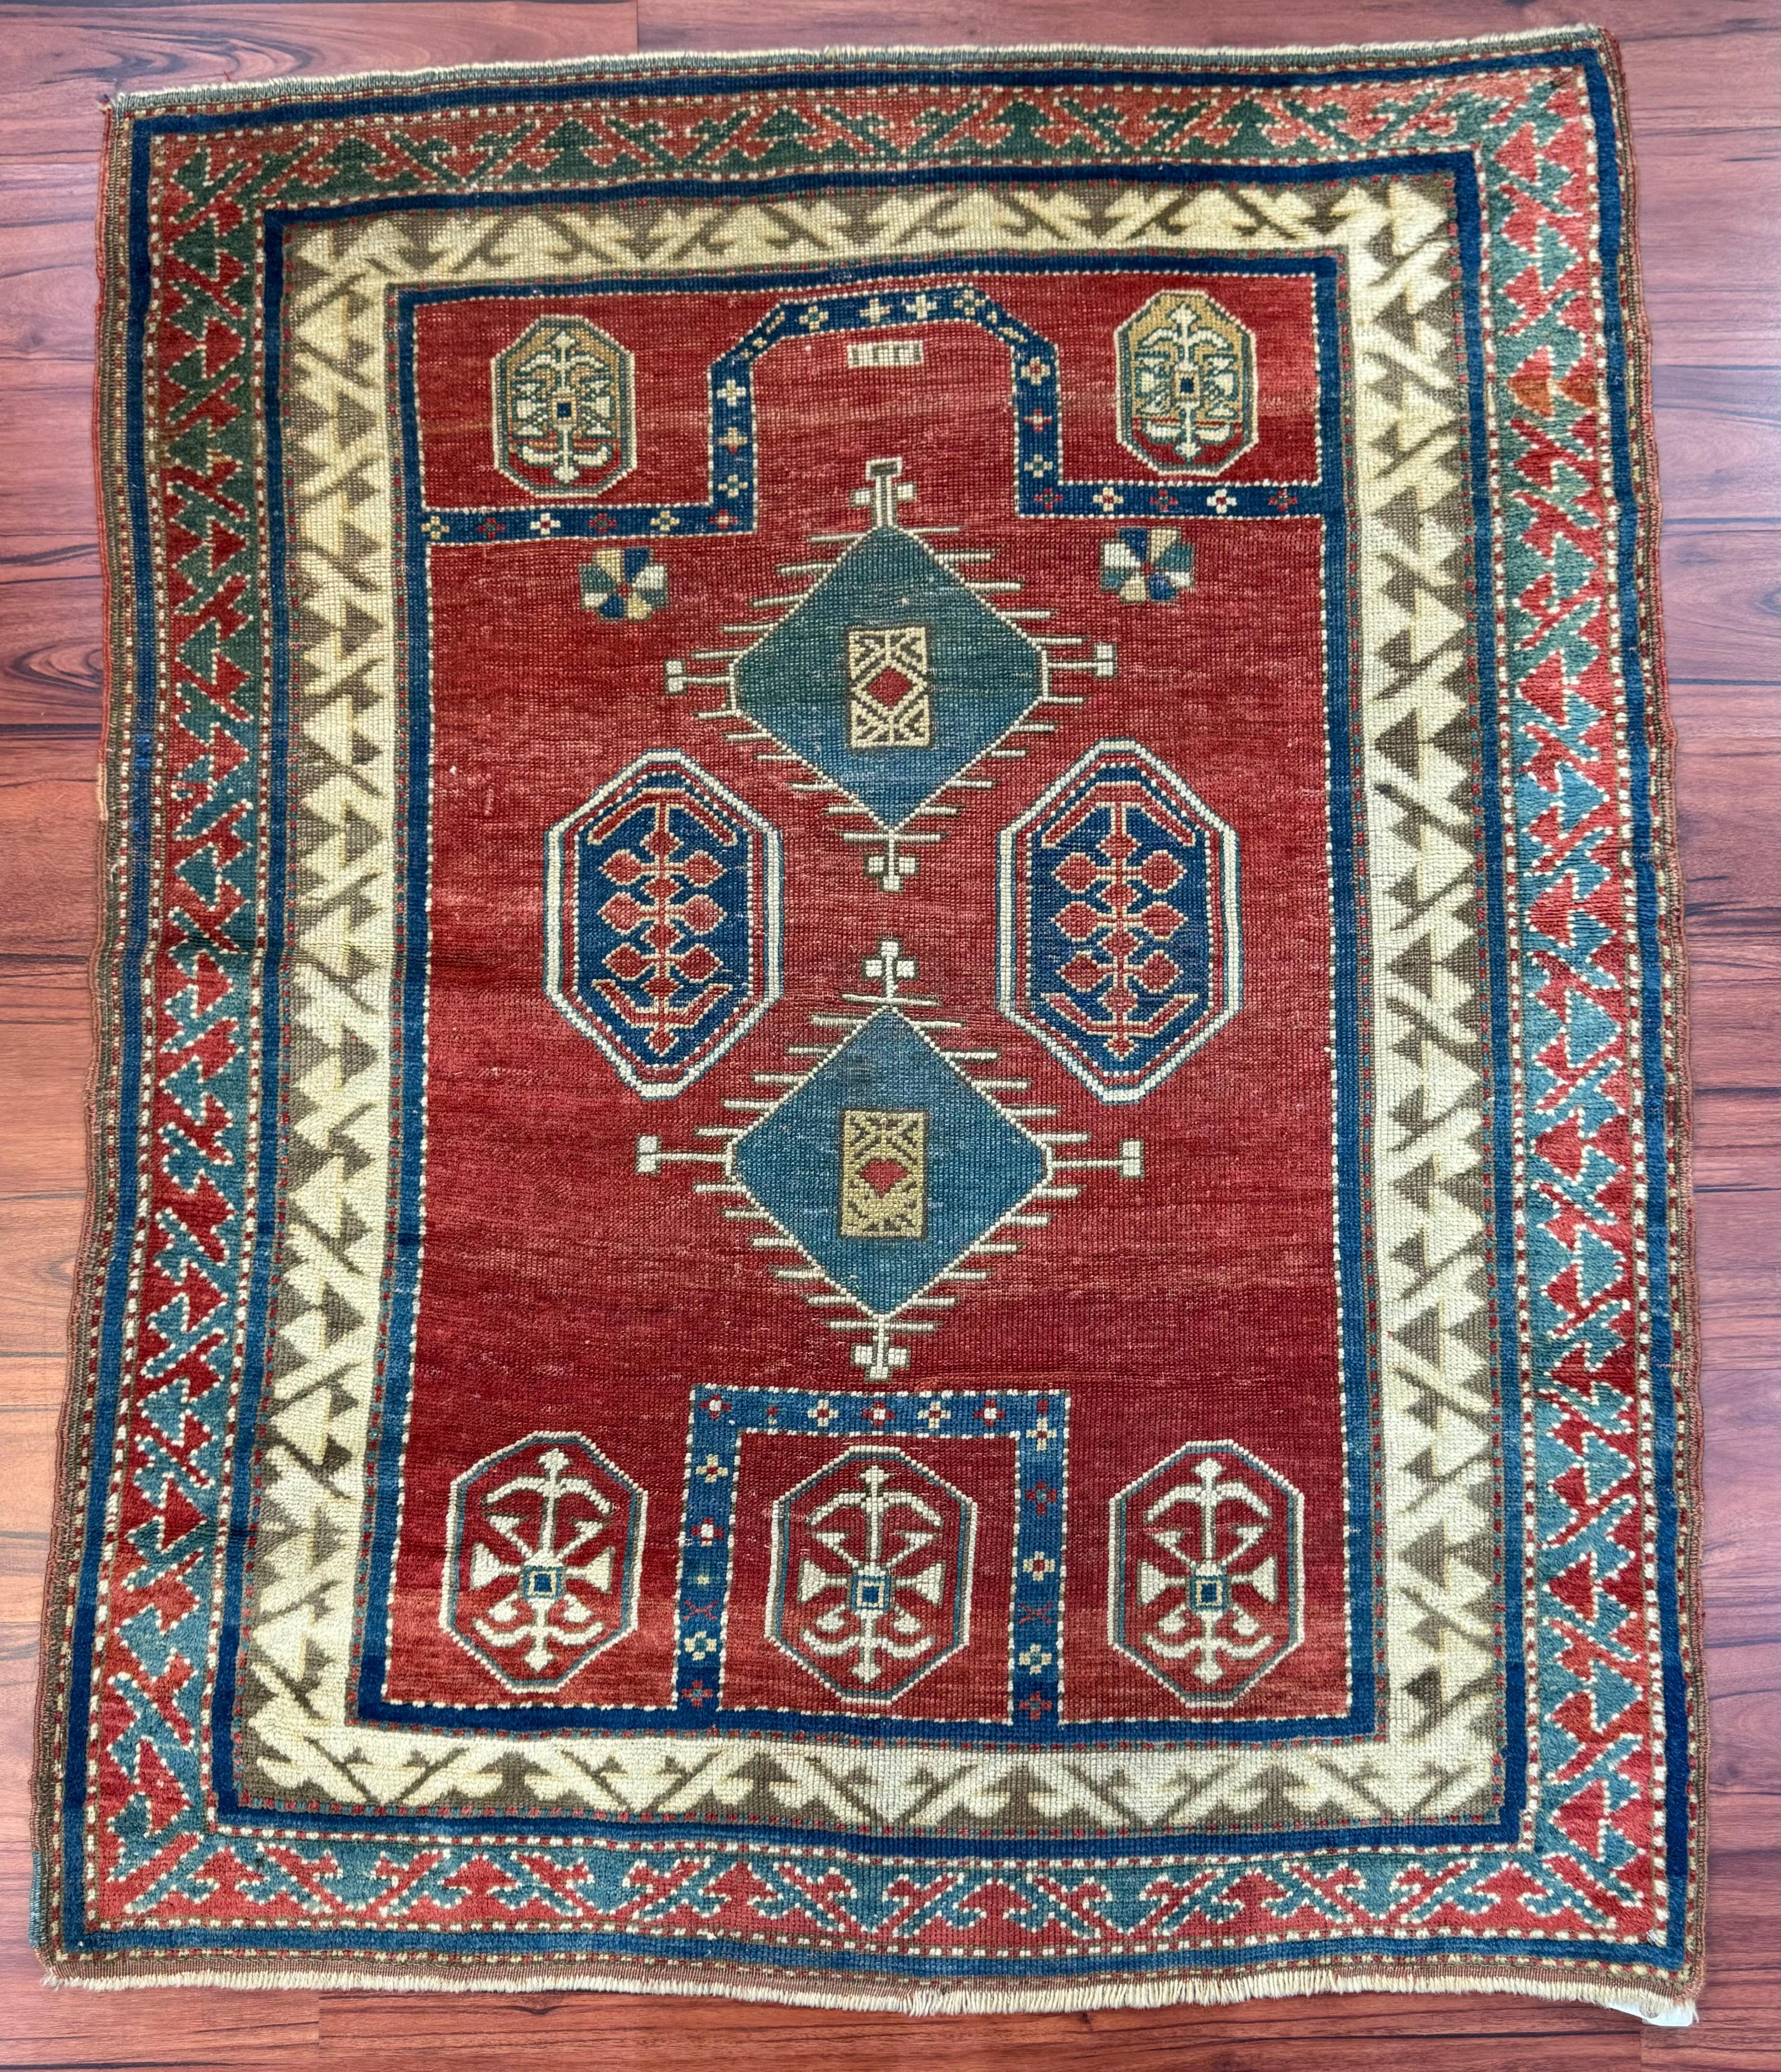 A stunning Antique Fachralo Kazak Rug that measures in at 3’9” by 4’8” ft. This rug is in excellent condition considering its rich history. Feel free to message me regarding this listing or any other I have on my page! 